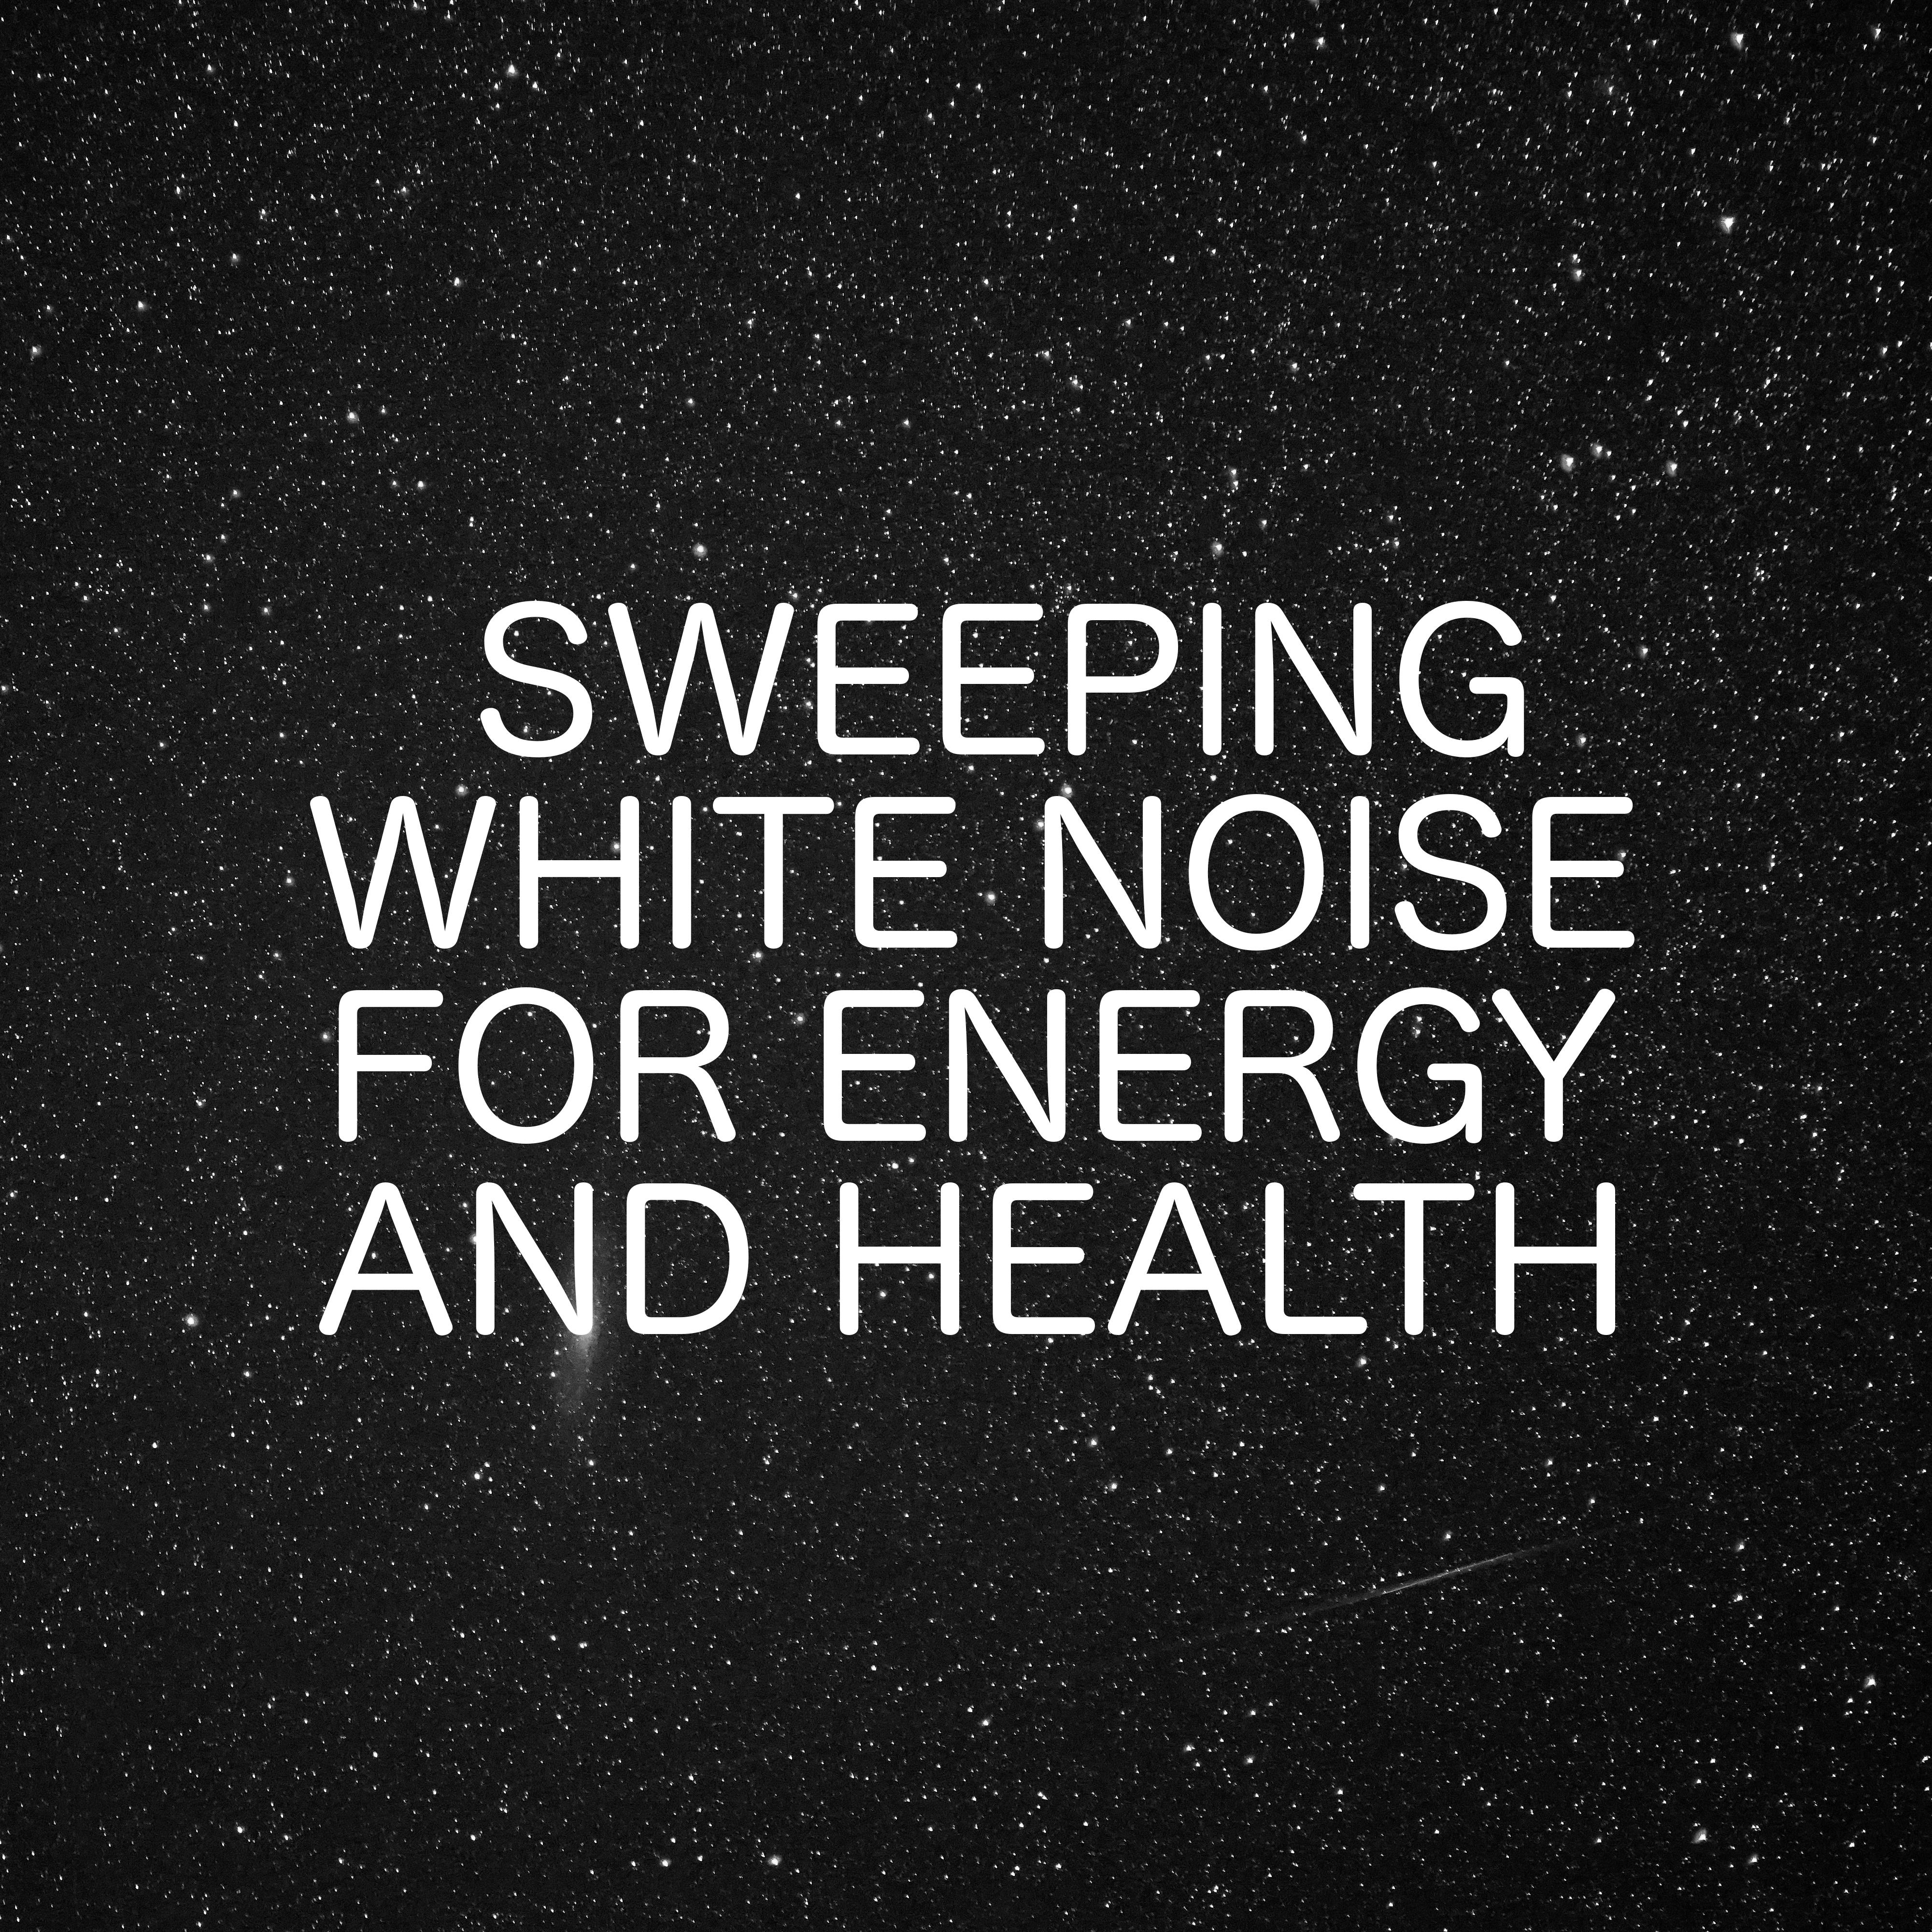 Sweeping White Noise For Energy And Healing